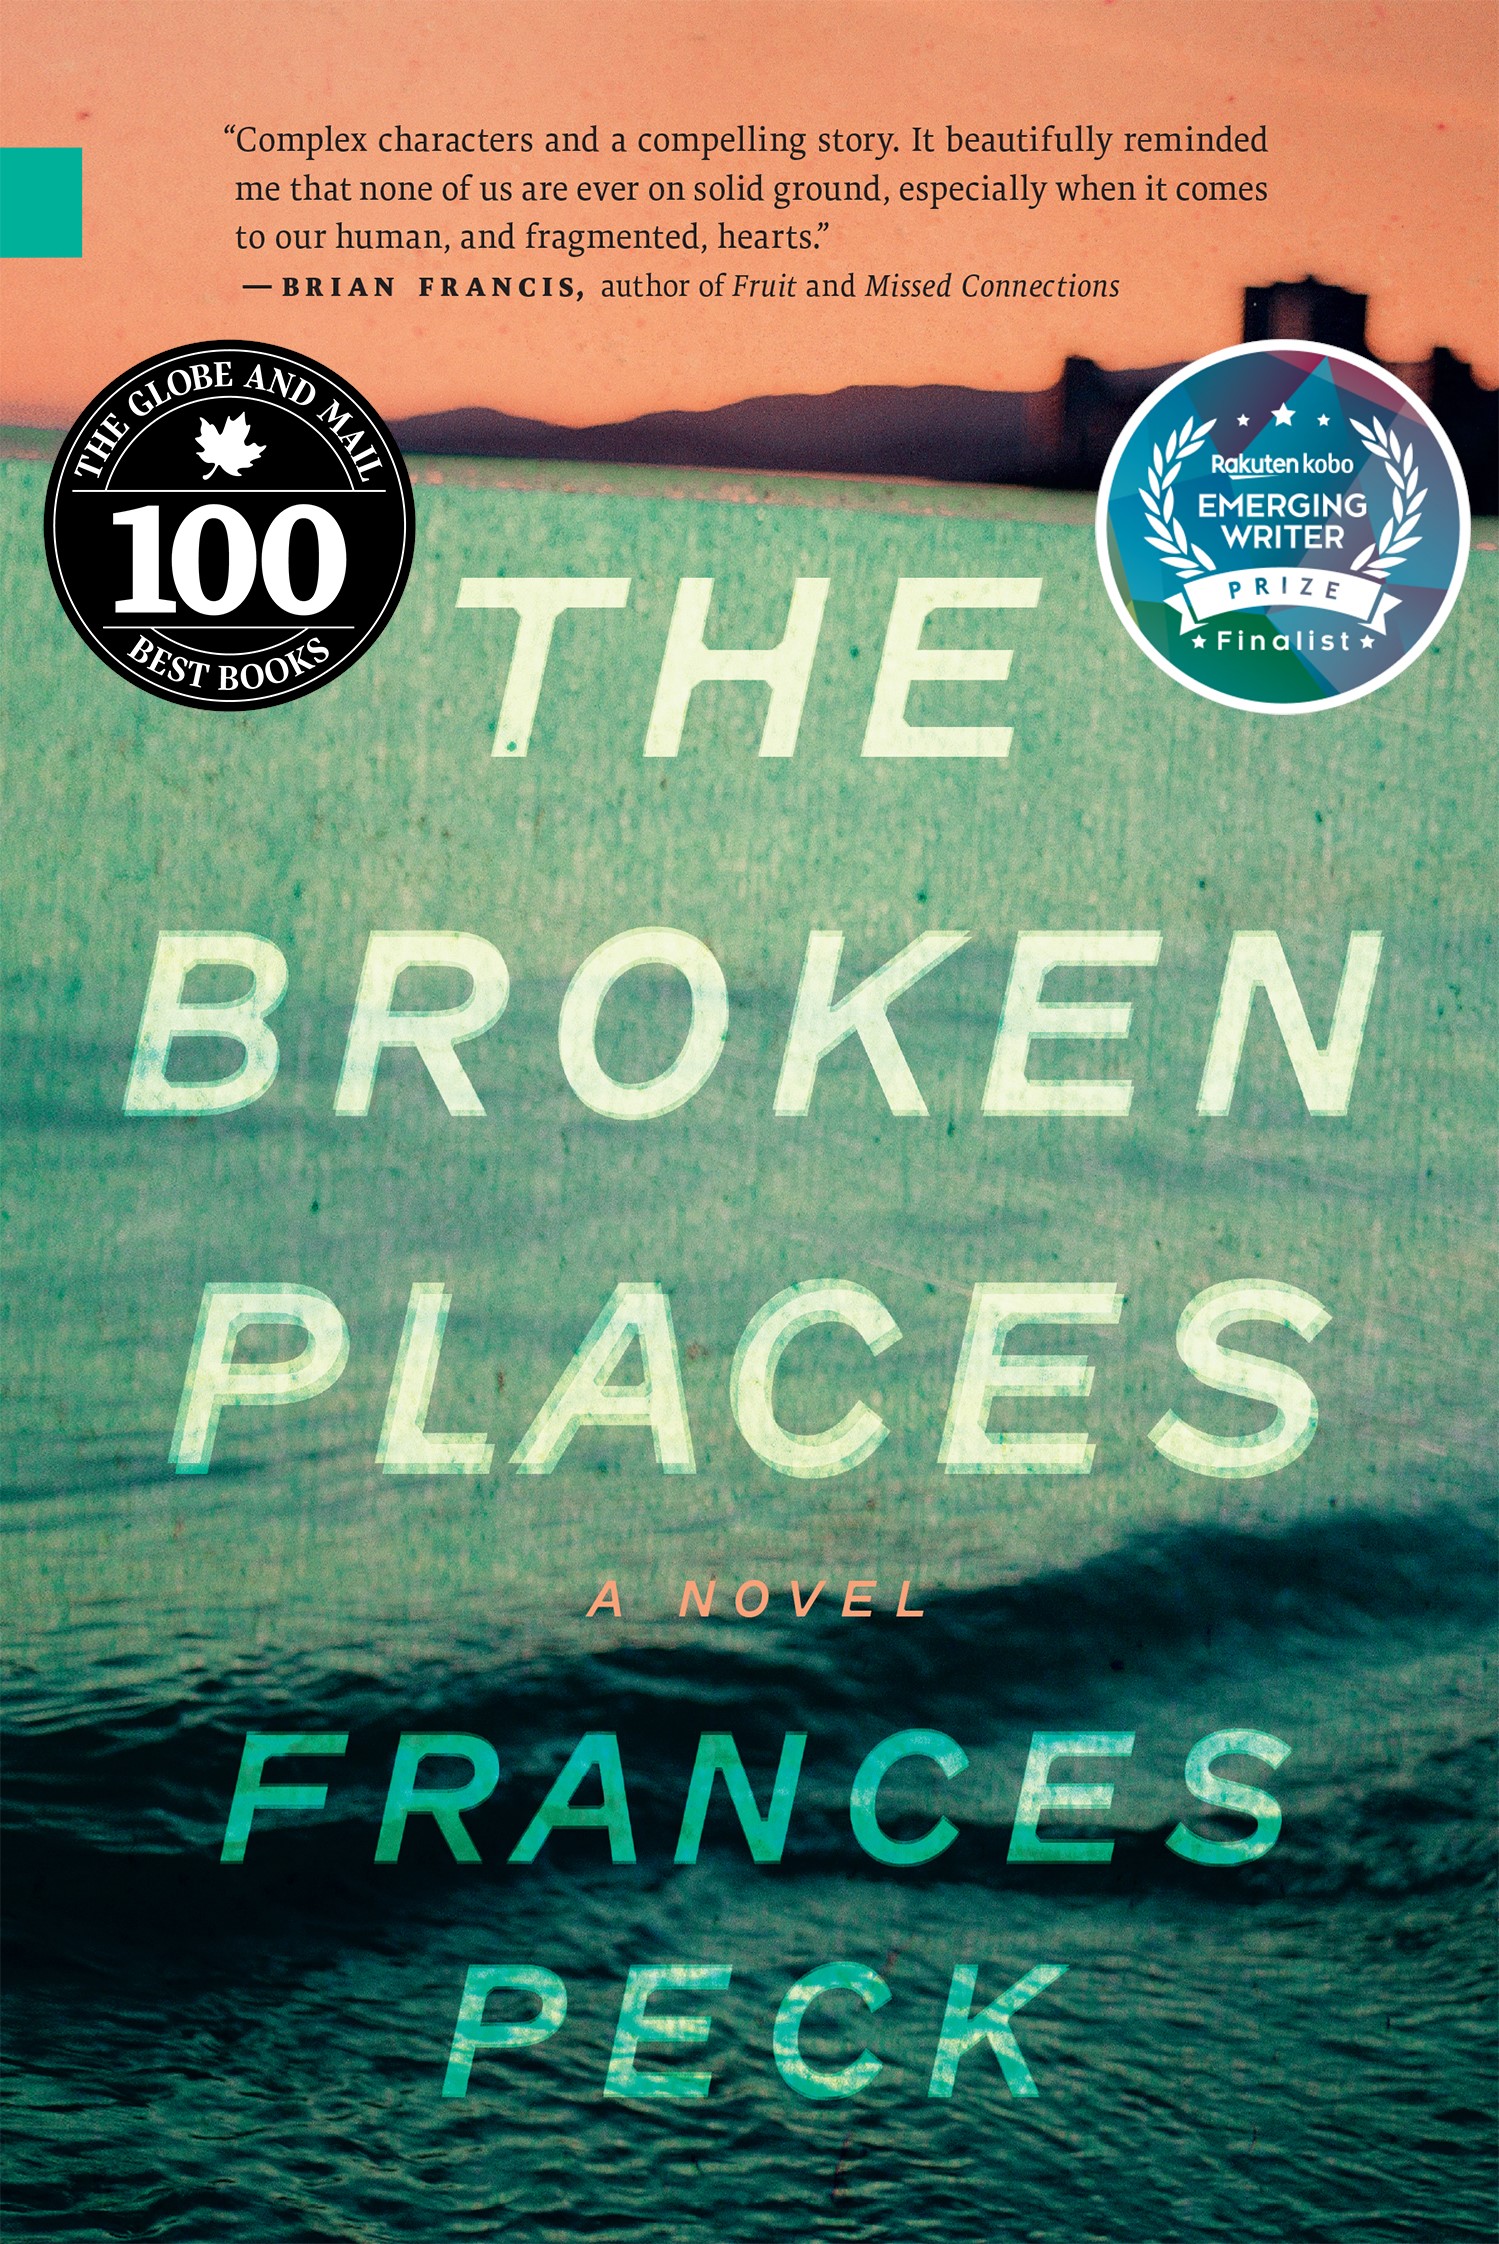 The cover of The Broken Places, with a bluish-green "finalist" seal from the Rakuten Kobo Emerging Writer Prize in the upper right-hand corner, across from the black-and-white Globe and Mail Best Books seal in the upper left-hand corner.